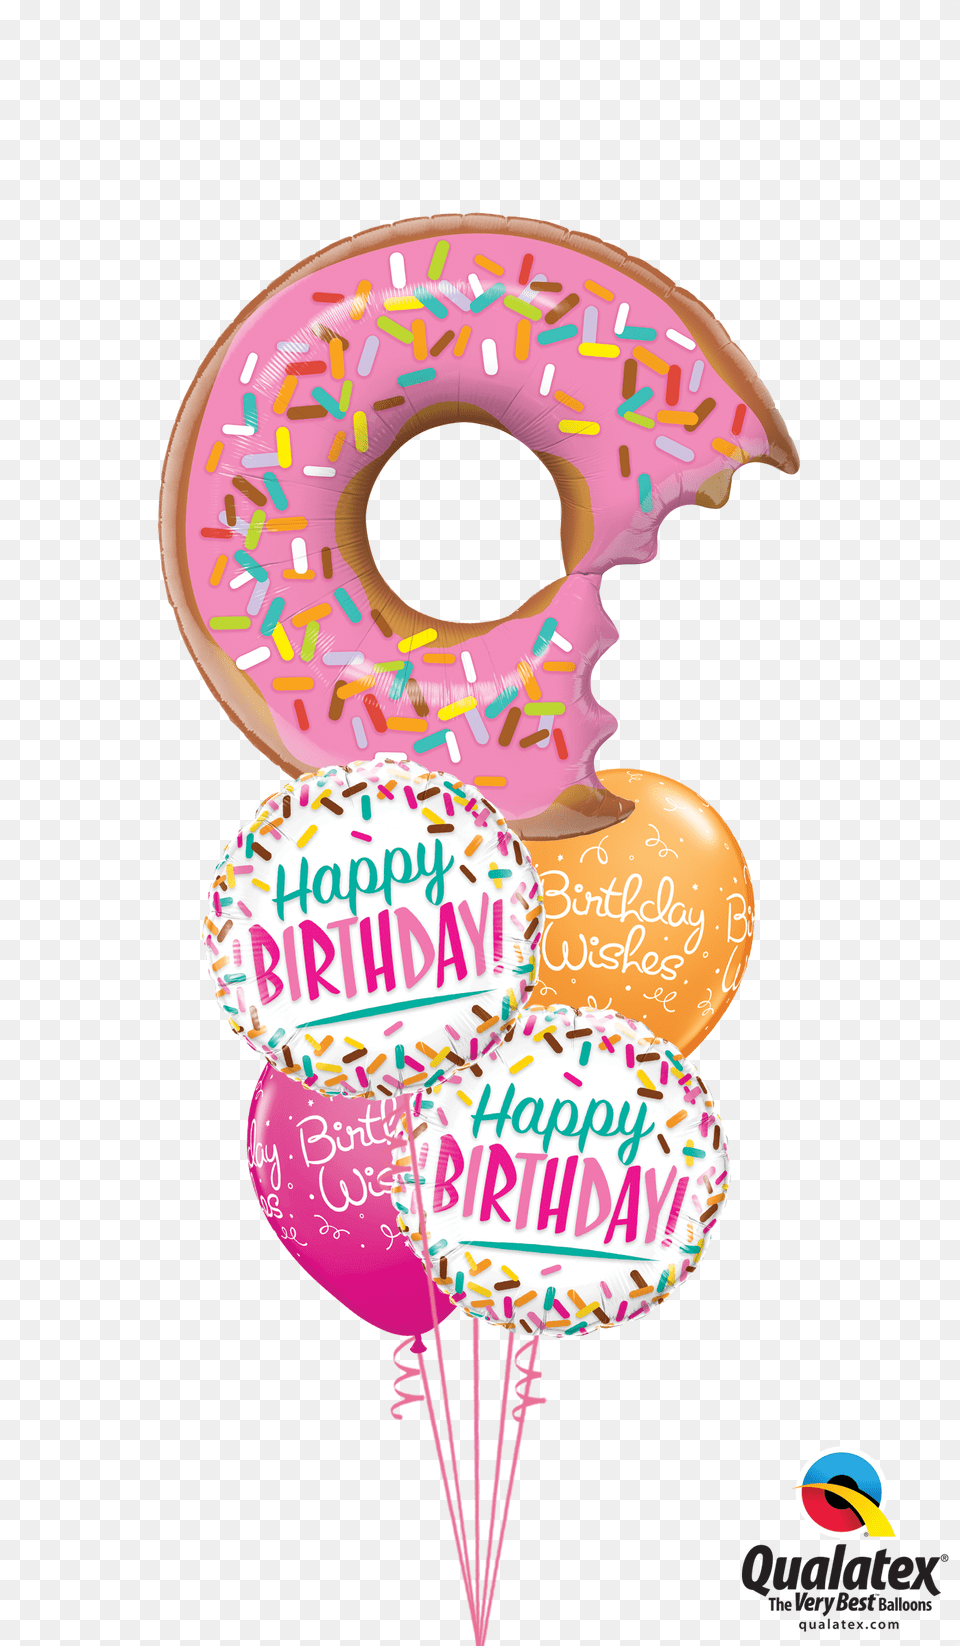 Donut Birthday Wishes, Birthday Cake, Sweets, Food, Dessert Png